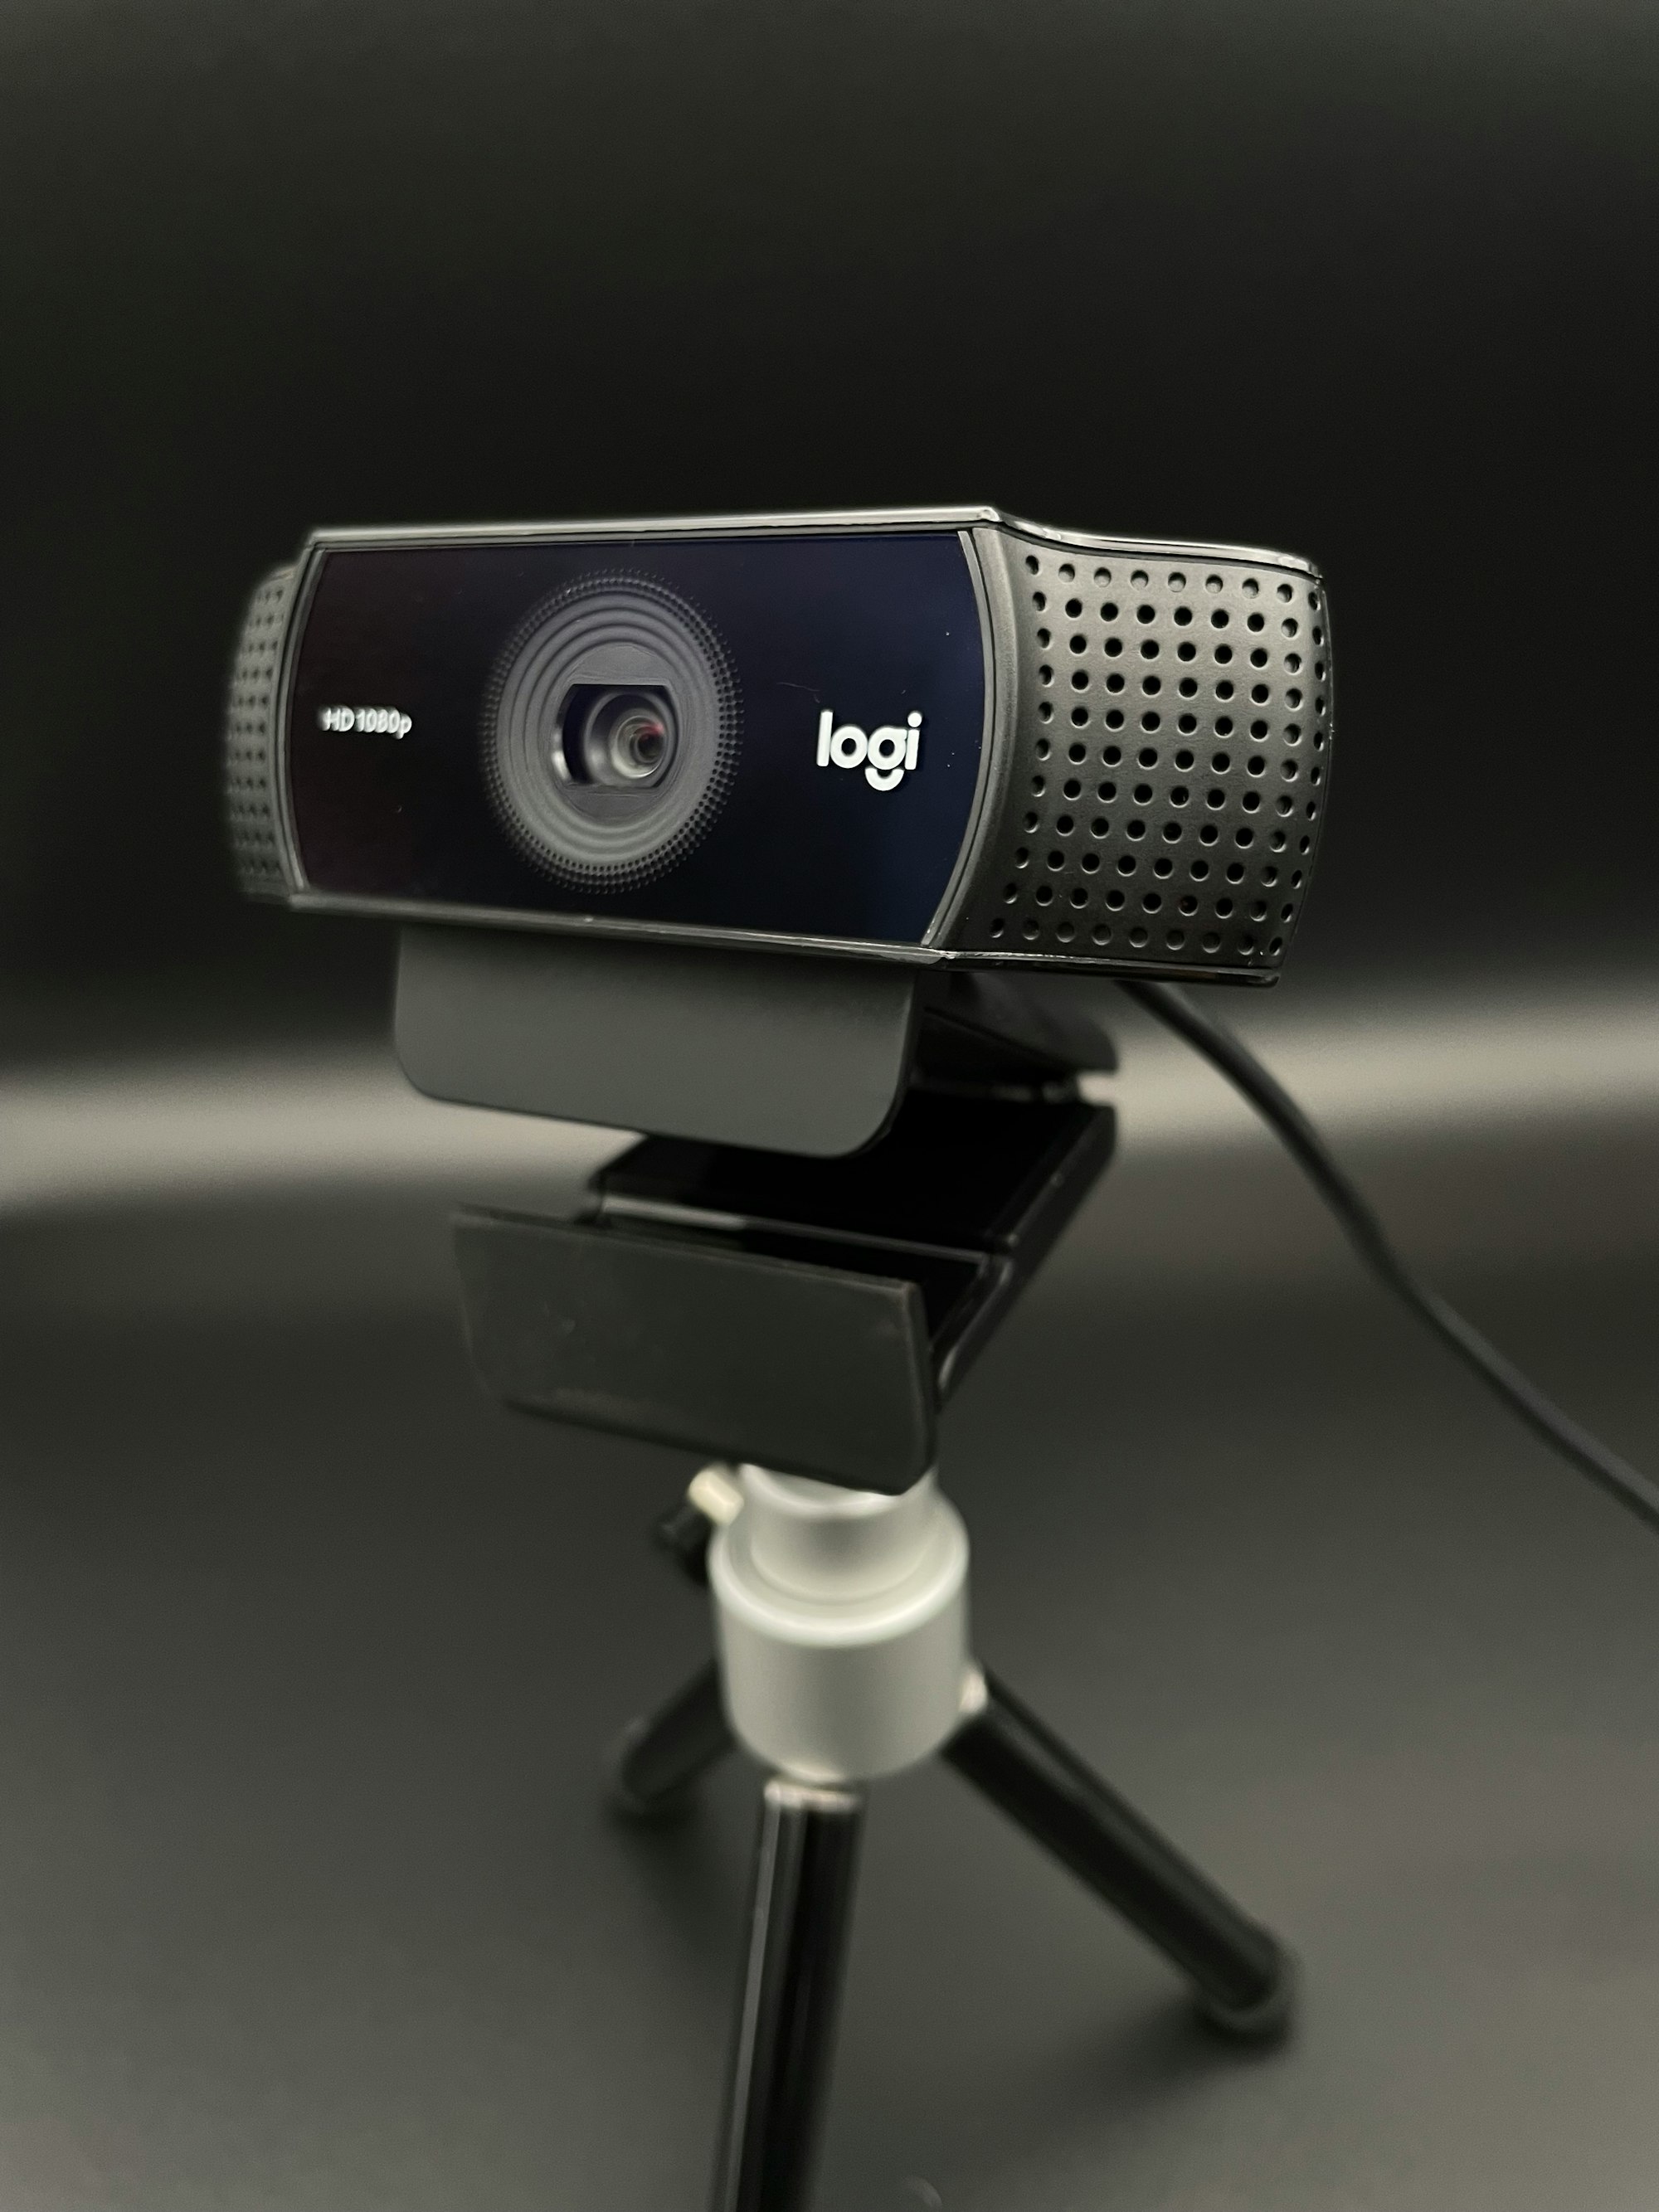 A Logitech C922x camera for streaming.

Provided by Streamgrad.com
/deeteerontop at twitch.tv/deeterontop